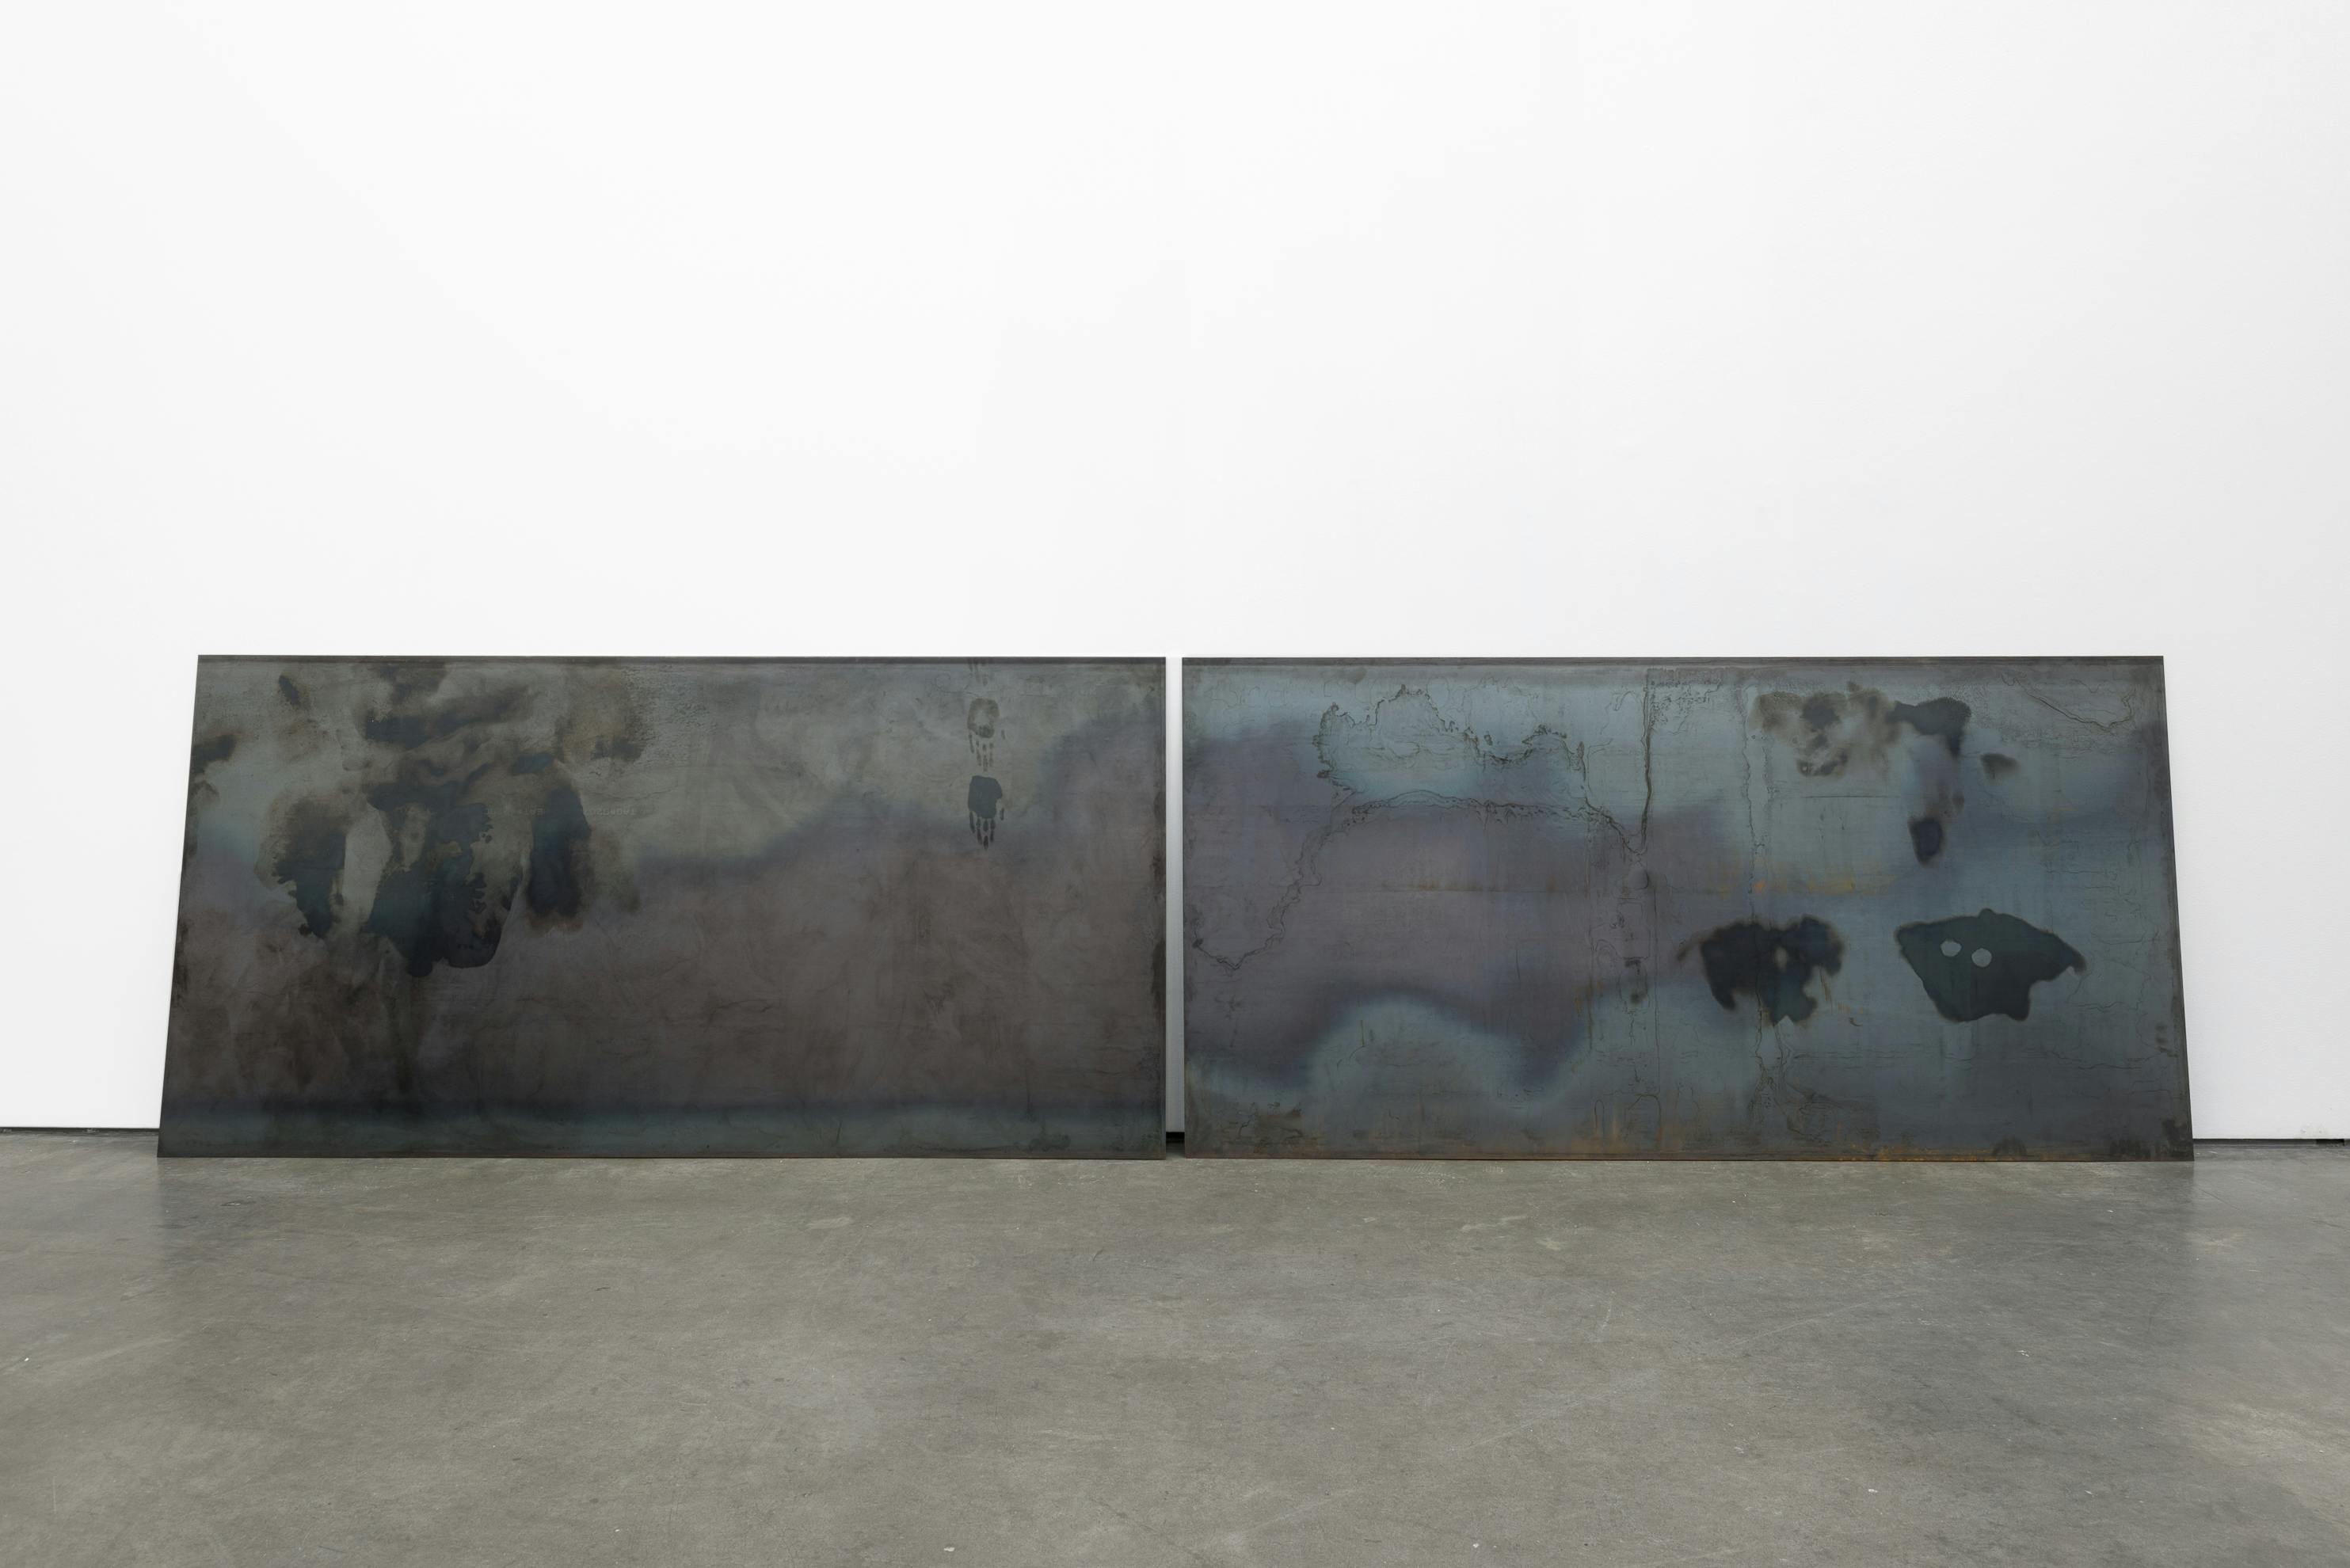 Two large rectangular steel sheets lean against a wall of a gallery space. The sheets sit horizontally on the floor and are marked with grease prints. On the left sheet two handprints are visible. 